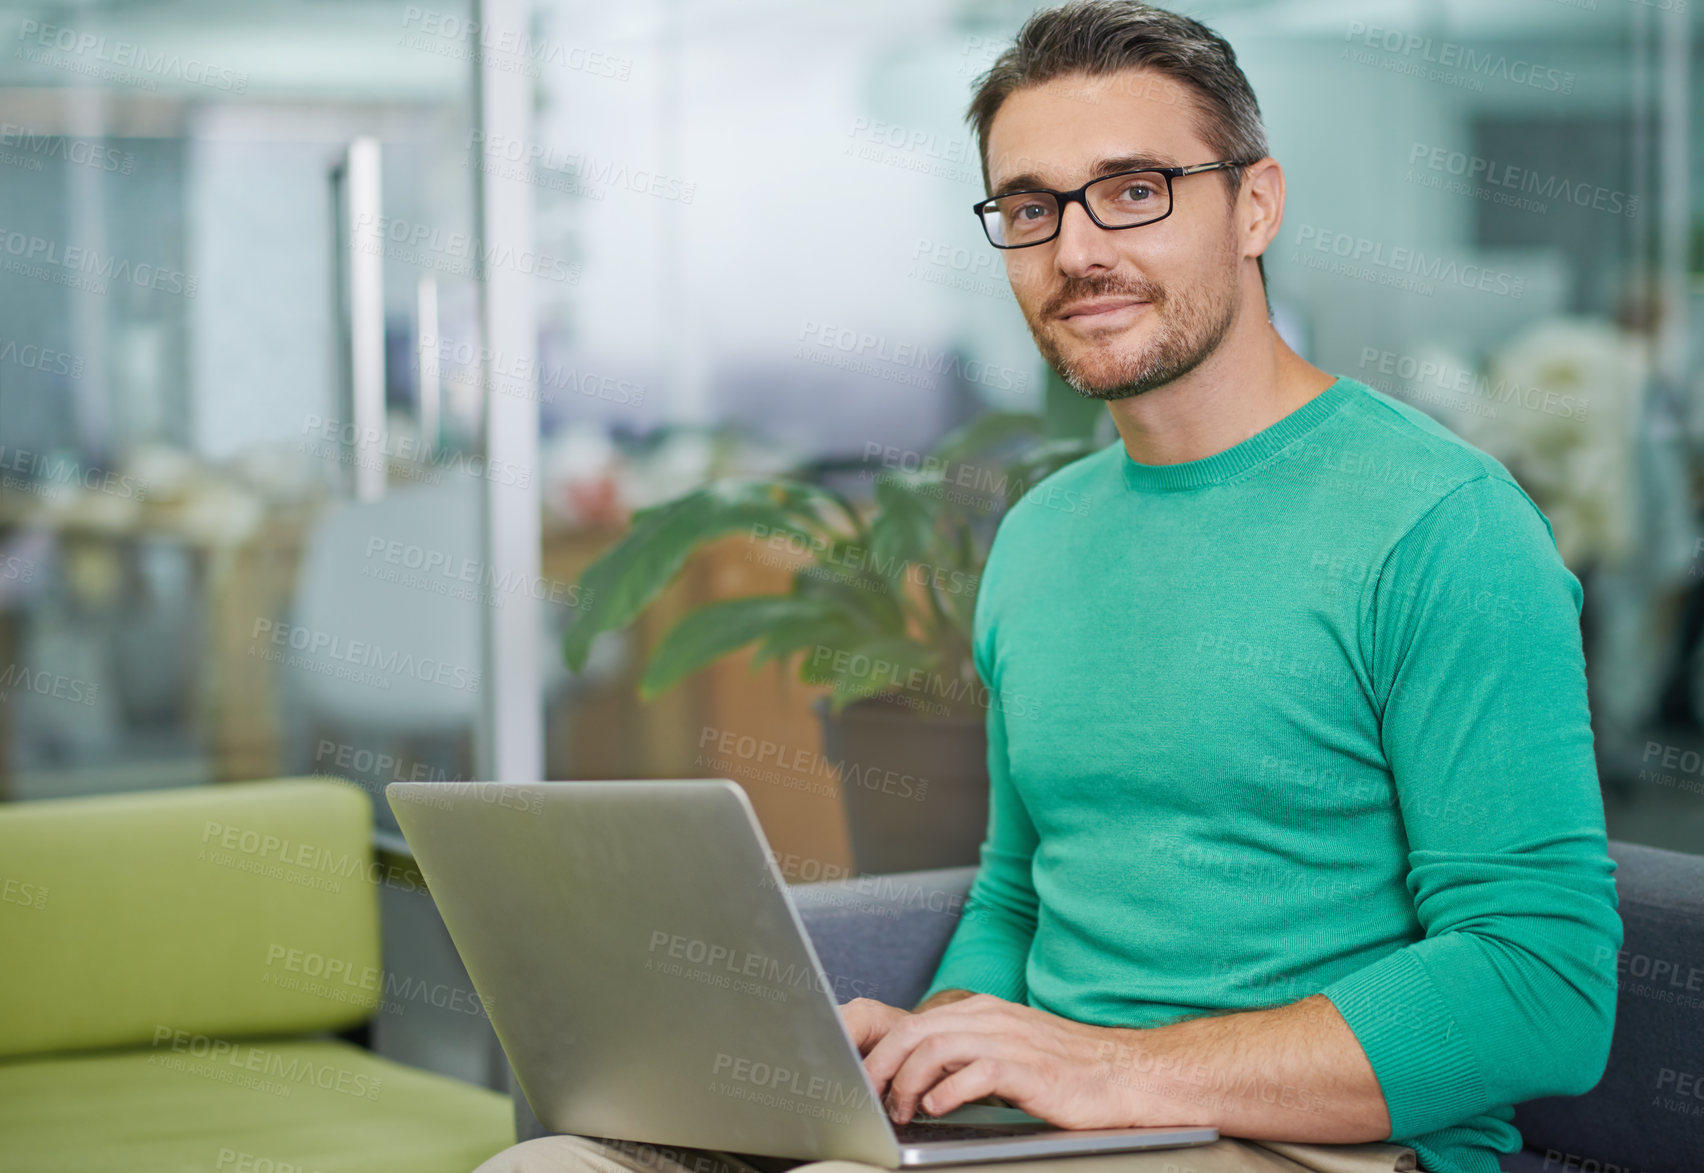 Buy stock photo Cropped shot of a handsome man working on his laptop